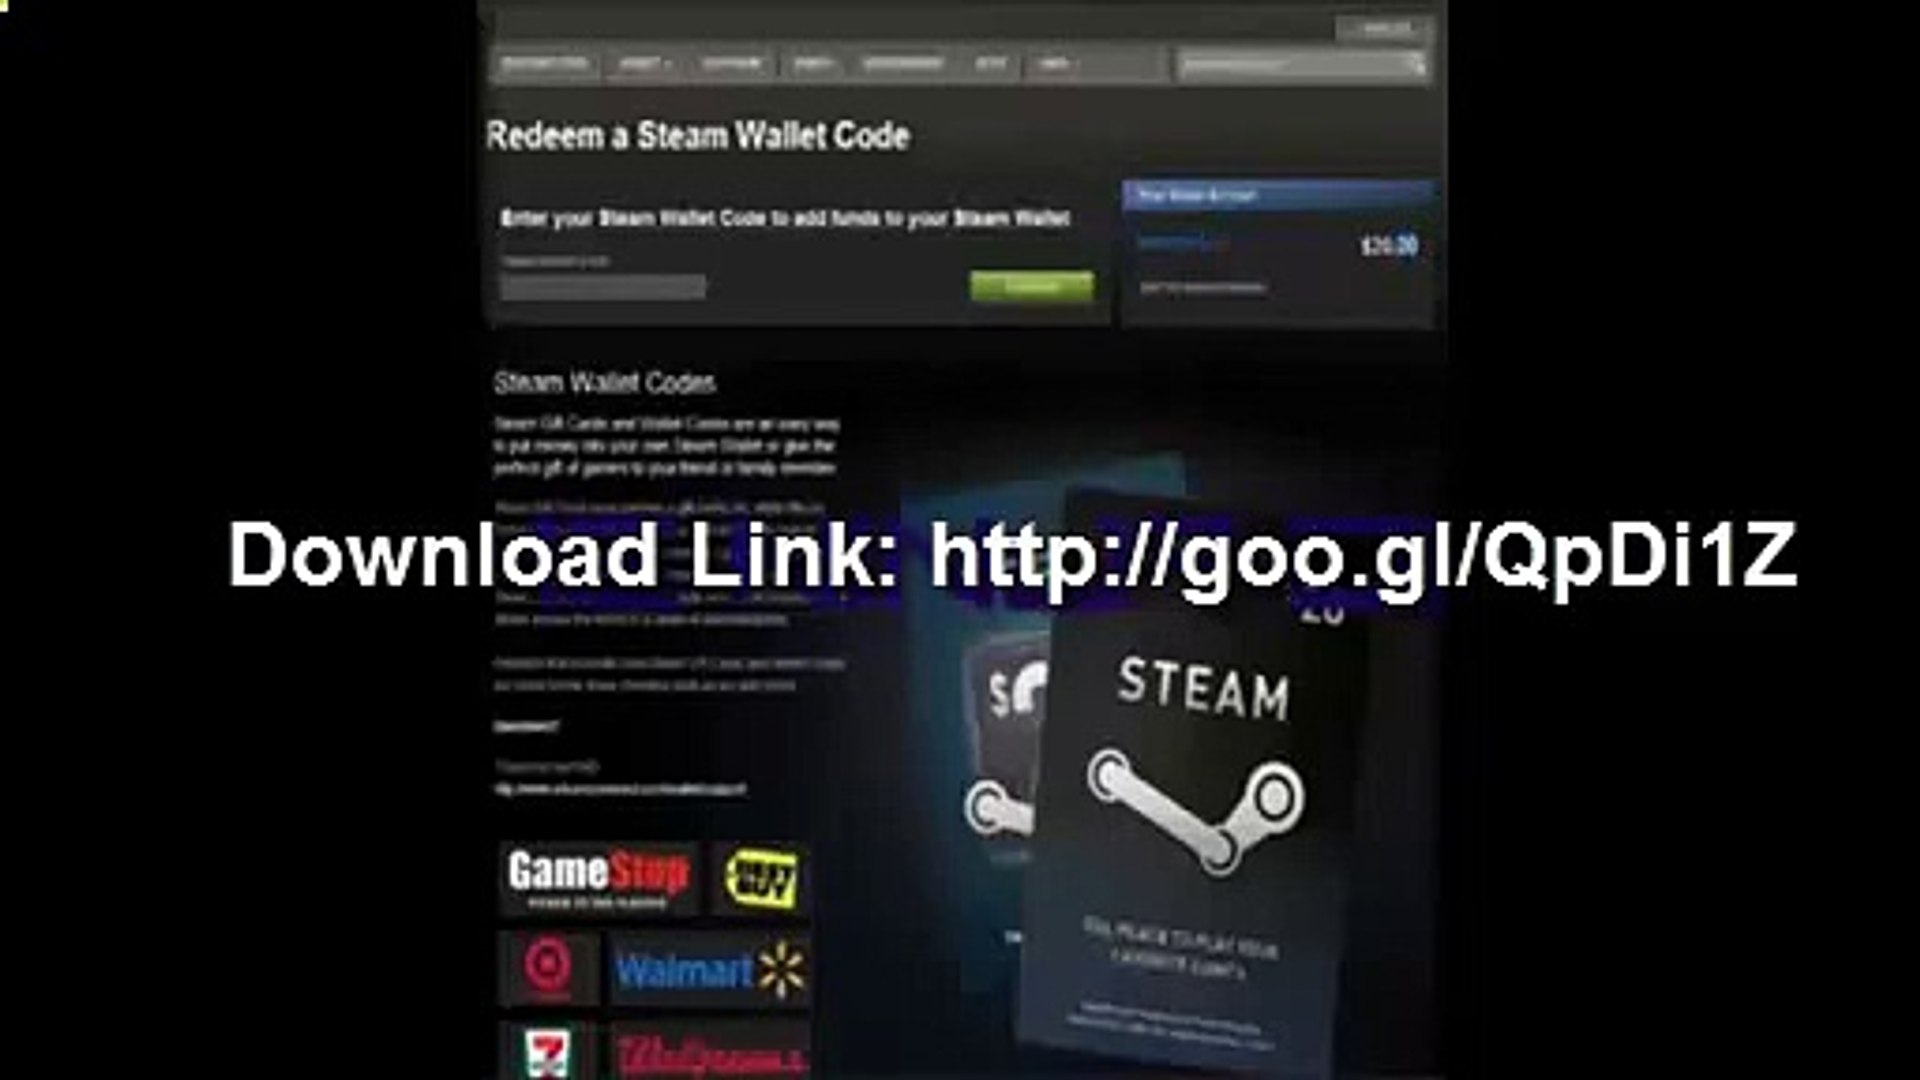 Free Steam Wallet Games Hack How To Get Free Steam Games No Password 2014  Free Steam Code - 